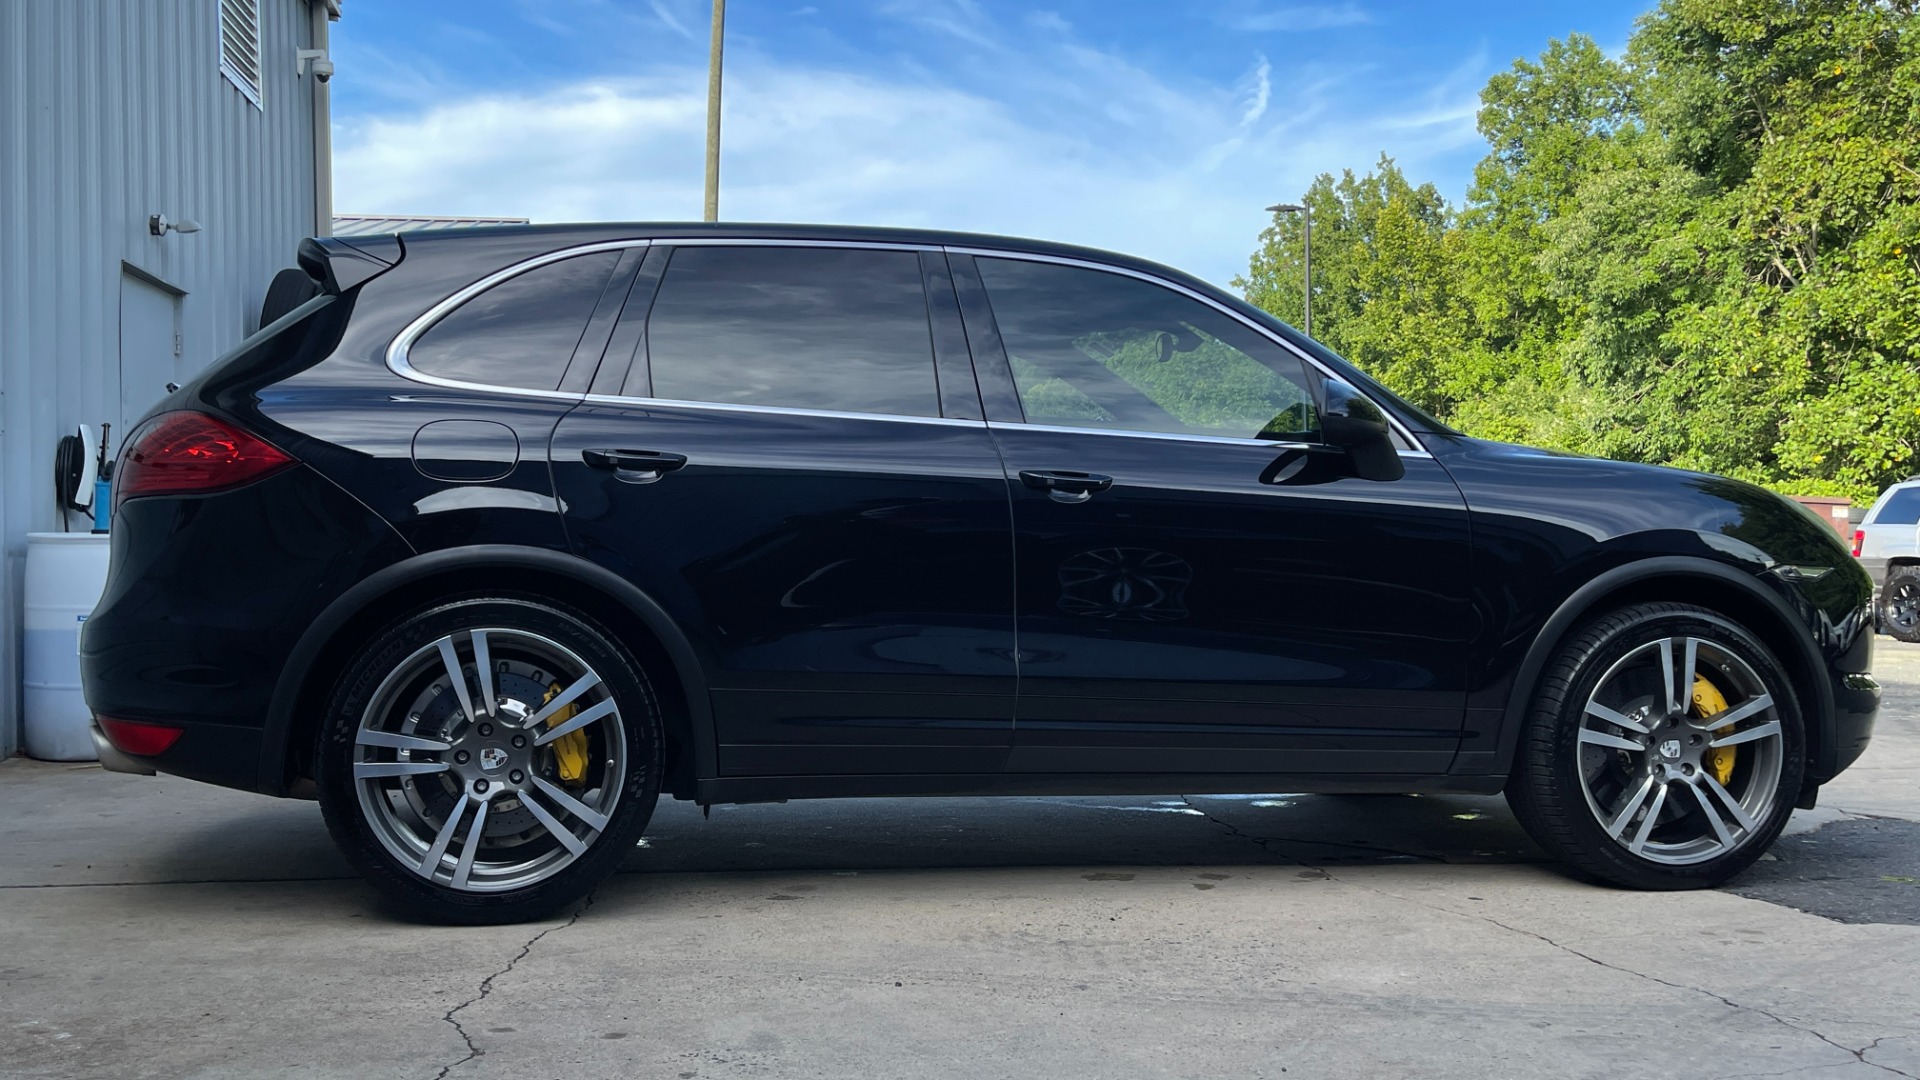 Used 2011 Porsche Cayenne Turbo / CARBON CERAMICS / CARBON FIBER TRIM / 21IN WHEELS / PREMIUM PACKAGE for sale Sold at Formula Imports in Charlotte NC 28227 11